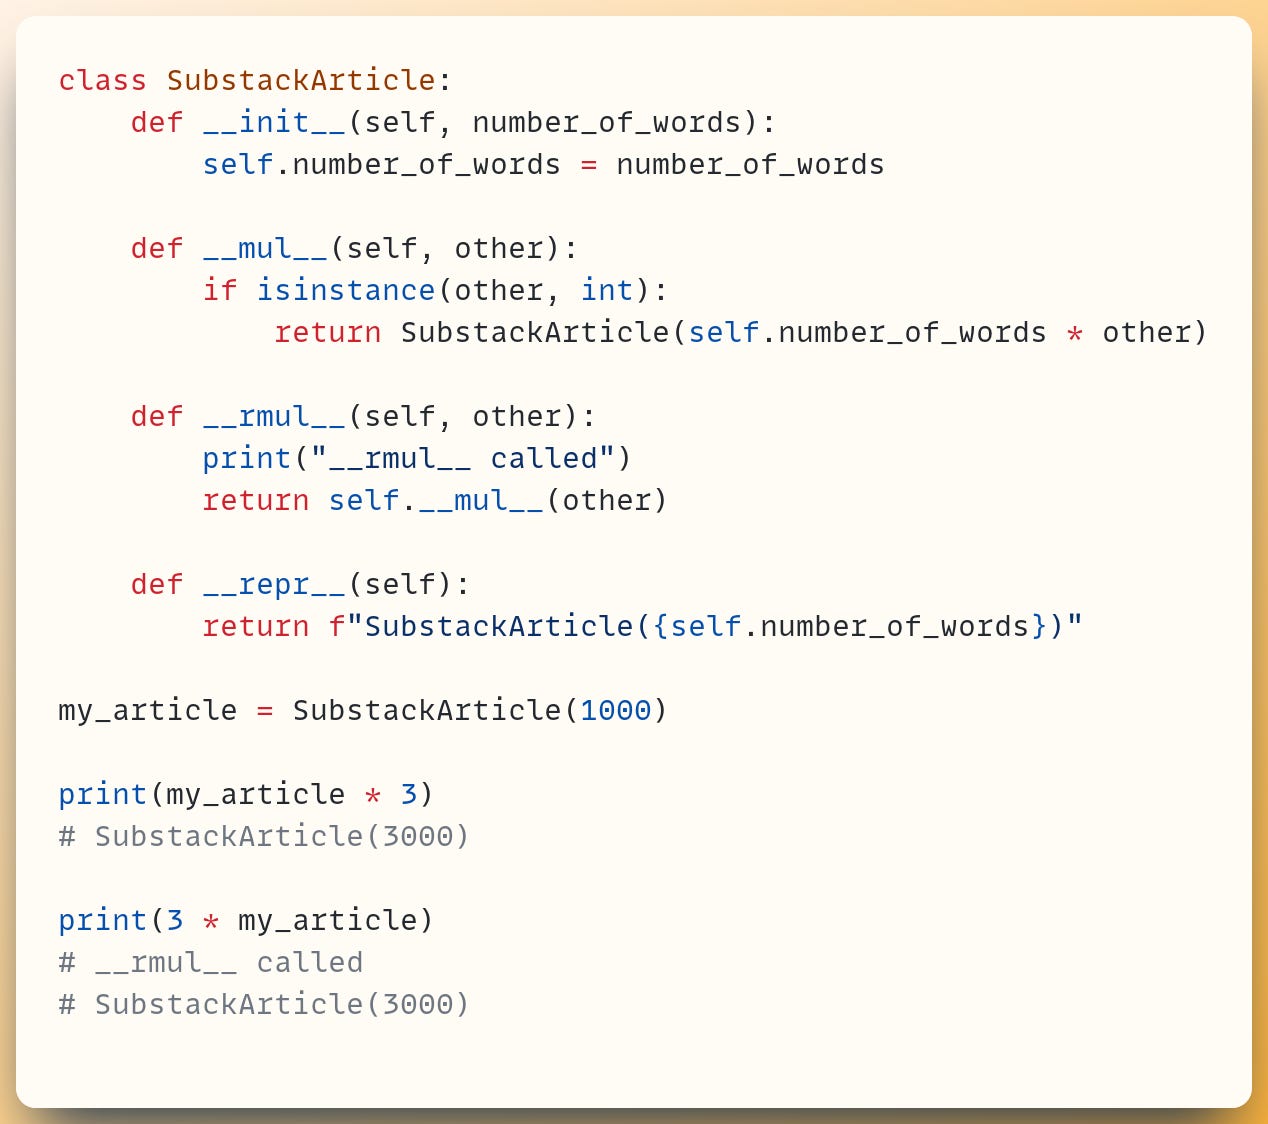 class SubstackArticle:     def __init__(self, number_of_words):         self.number_of_words = number_of_words ​     def __mul__(self, other):         if isinstance(other, int):             return SubstackArticle(self.number_of_words * other) ​     def __rmul__(self, other):         print("__rmul__ called")         return self.__mul__(other) ​     def __repr__(self):         return f"SubstackArticle({self.number_of_words})" ​ my_article = SubstackArticle(1000) ​ print(my_article * 3) # SubstackArticle(3000) ​ print(3 * my_article) # __rmul__ called # SubstackArticle(3000)